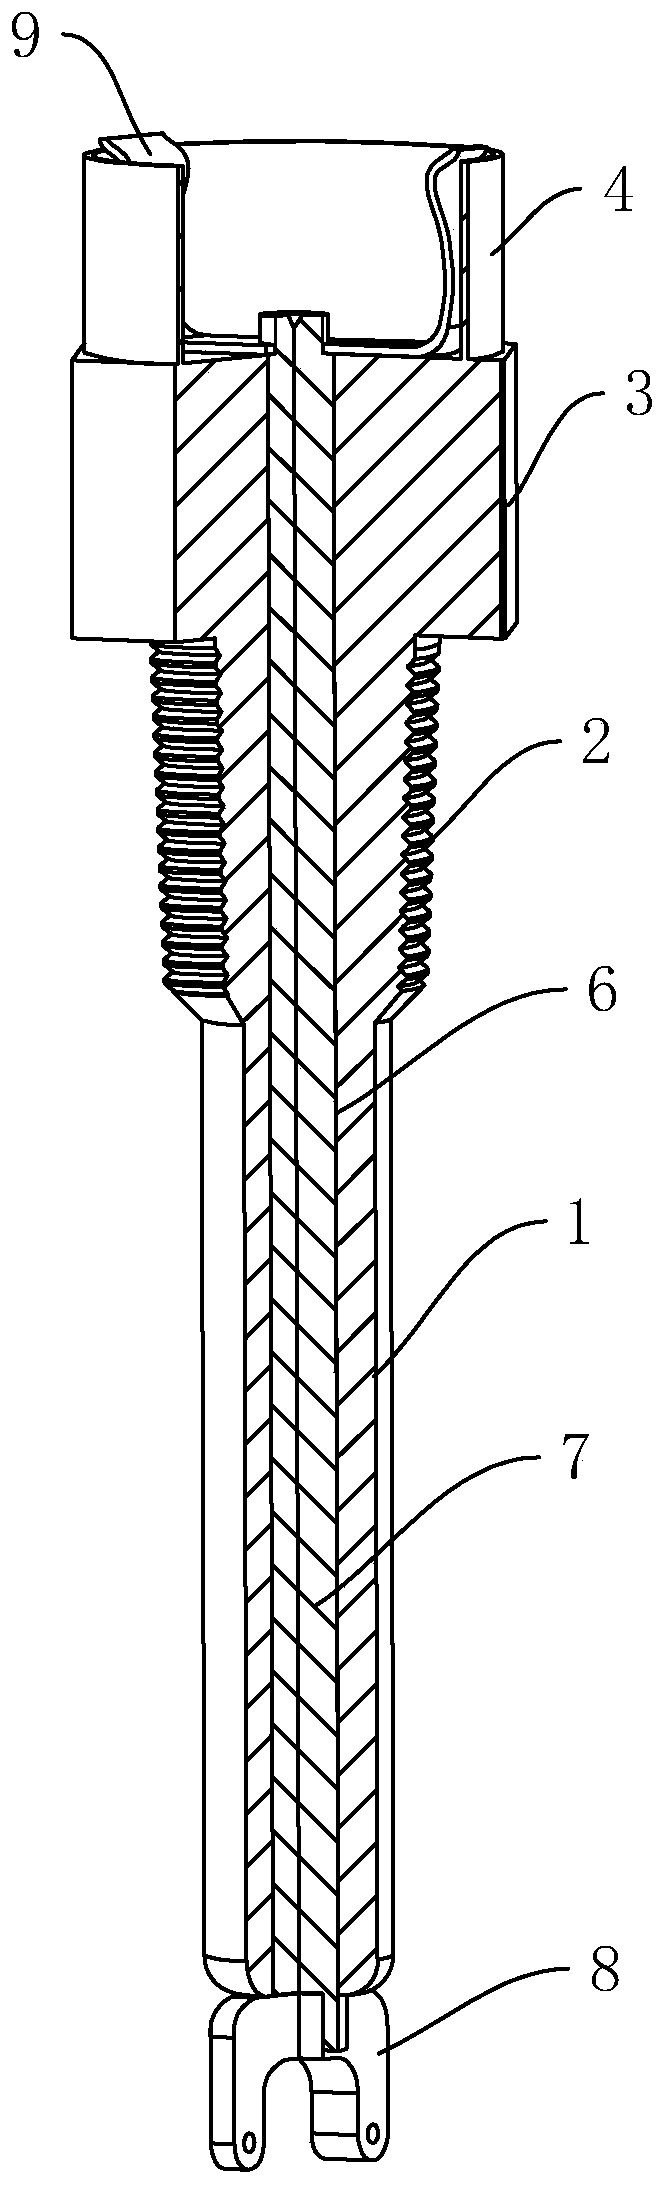 Method for producing conductive screw